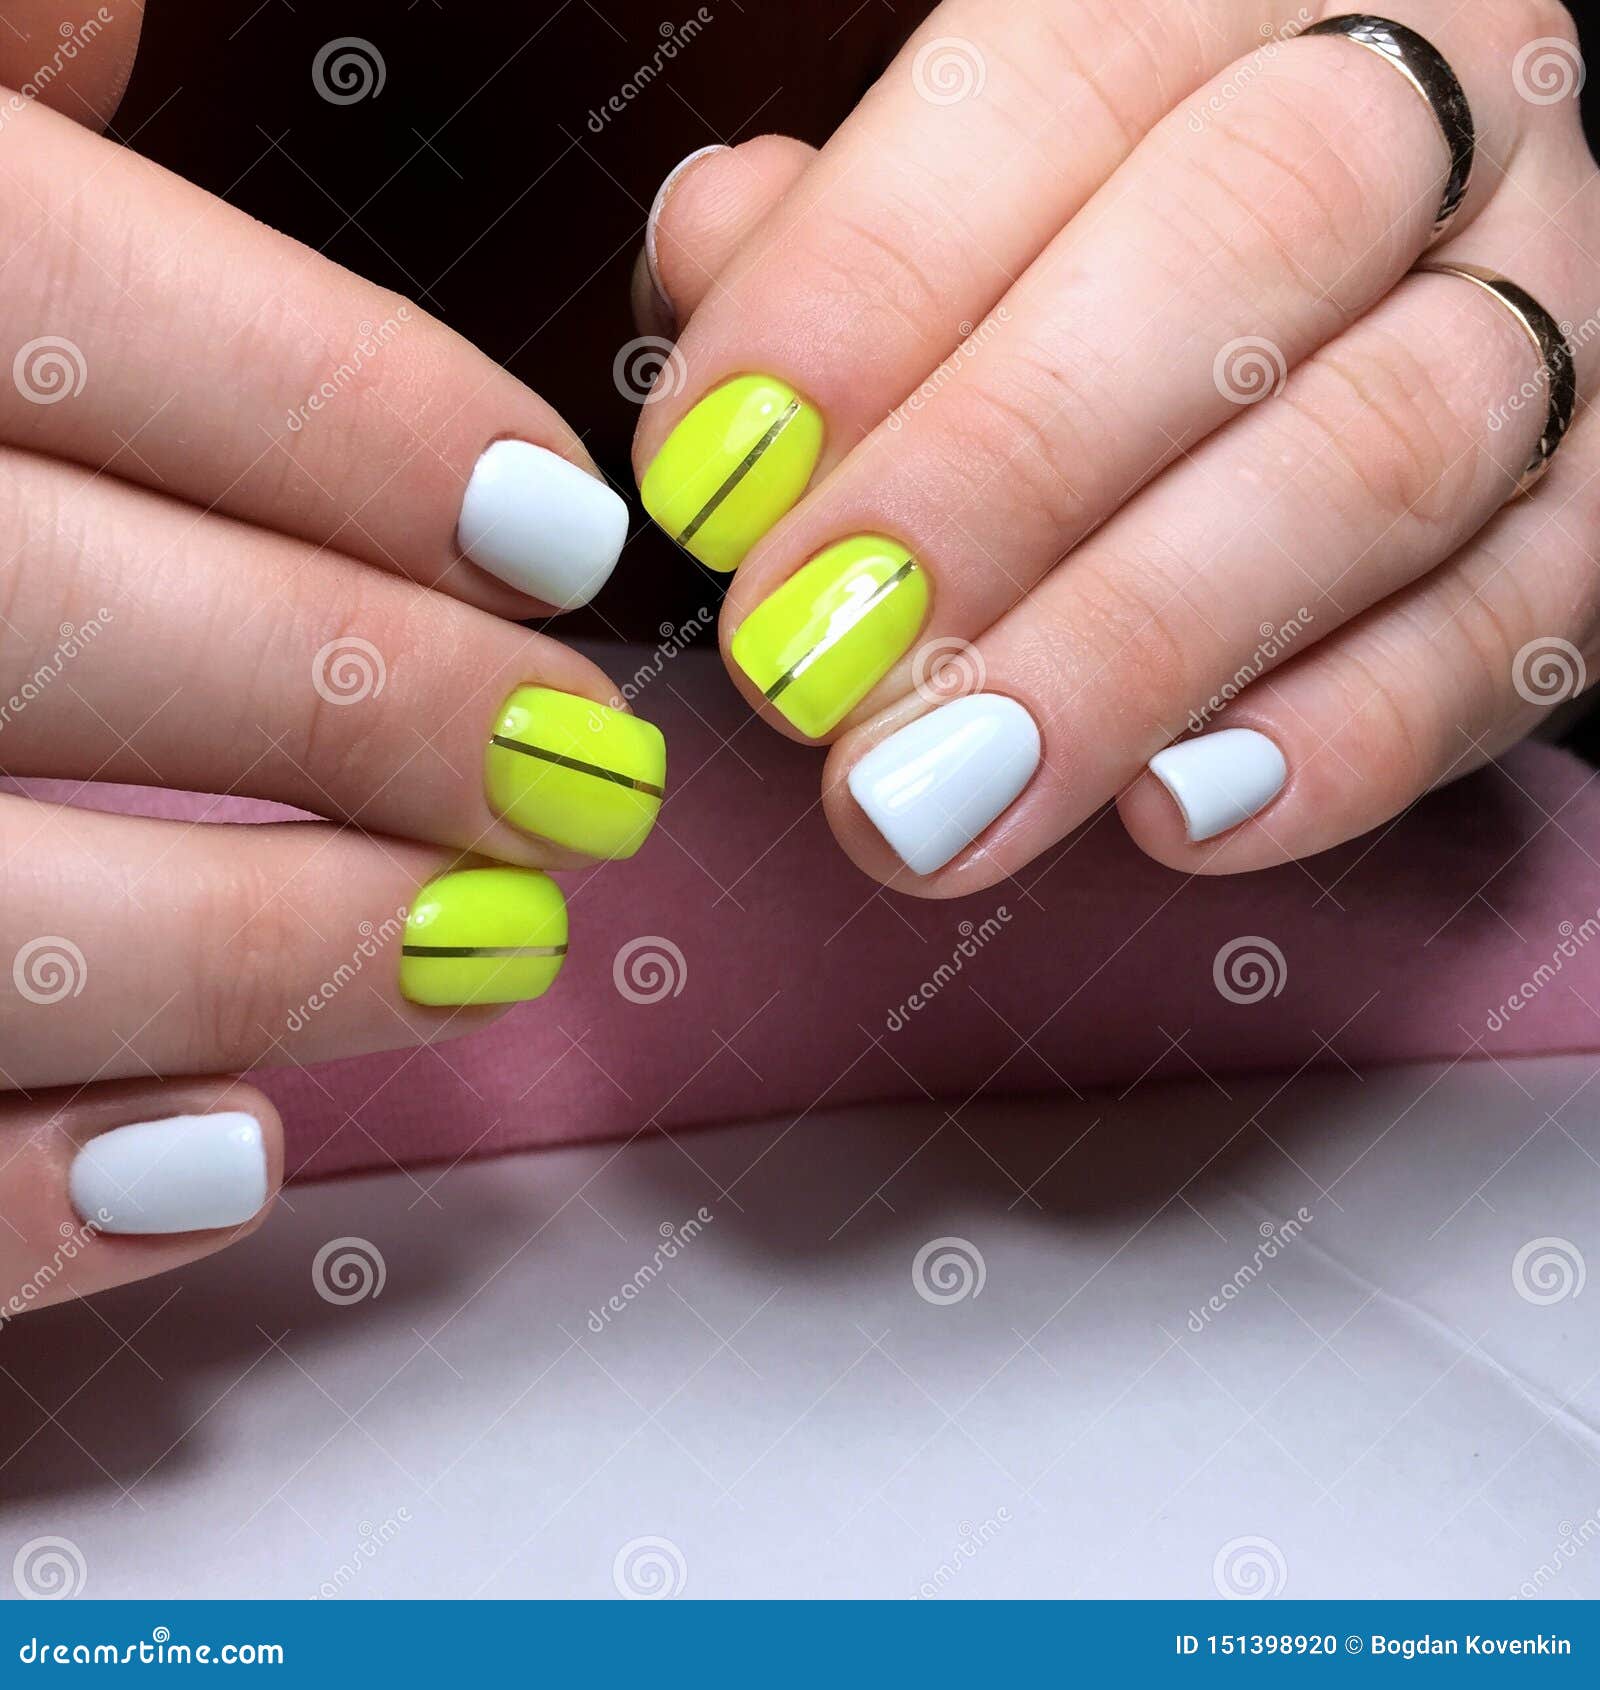 Yellow Manicure on the Nails. Yellow Nail Design on the Fingers ...